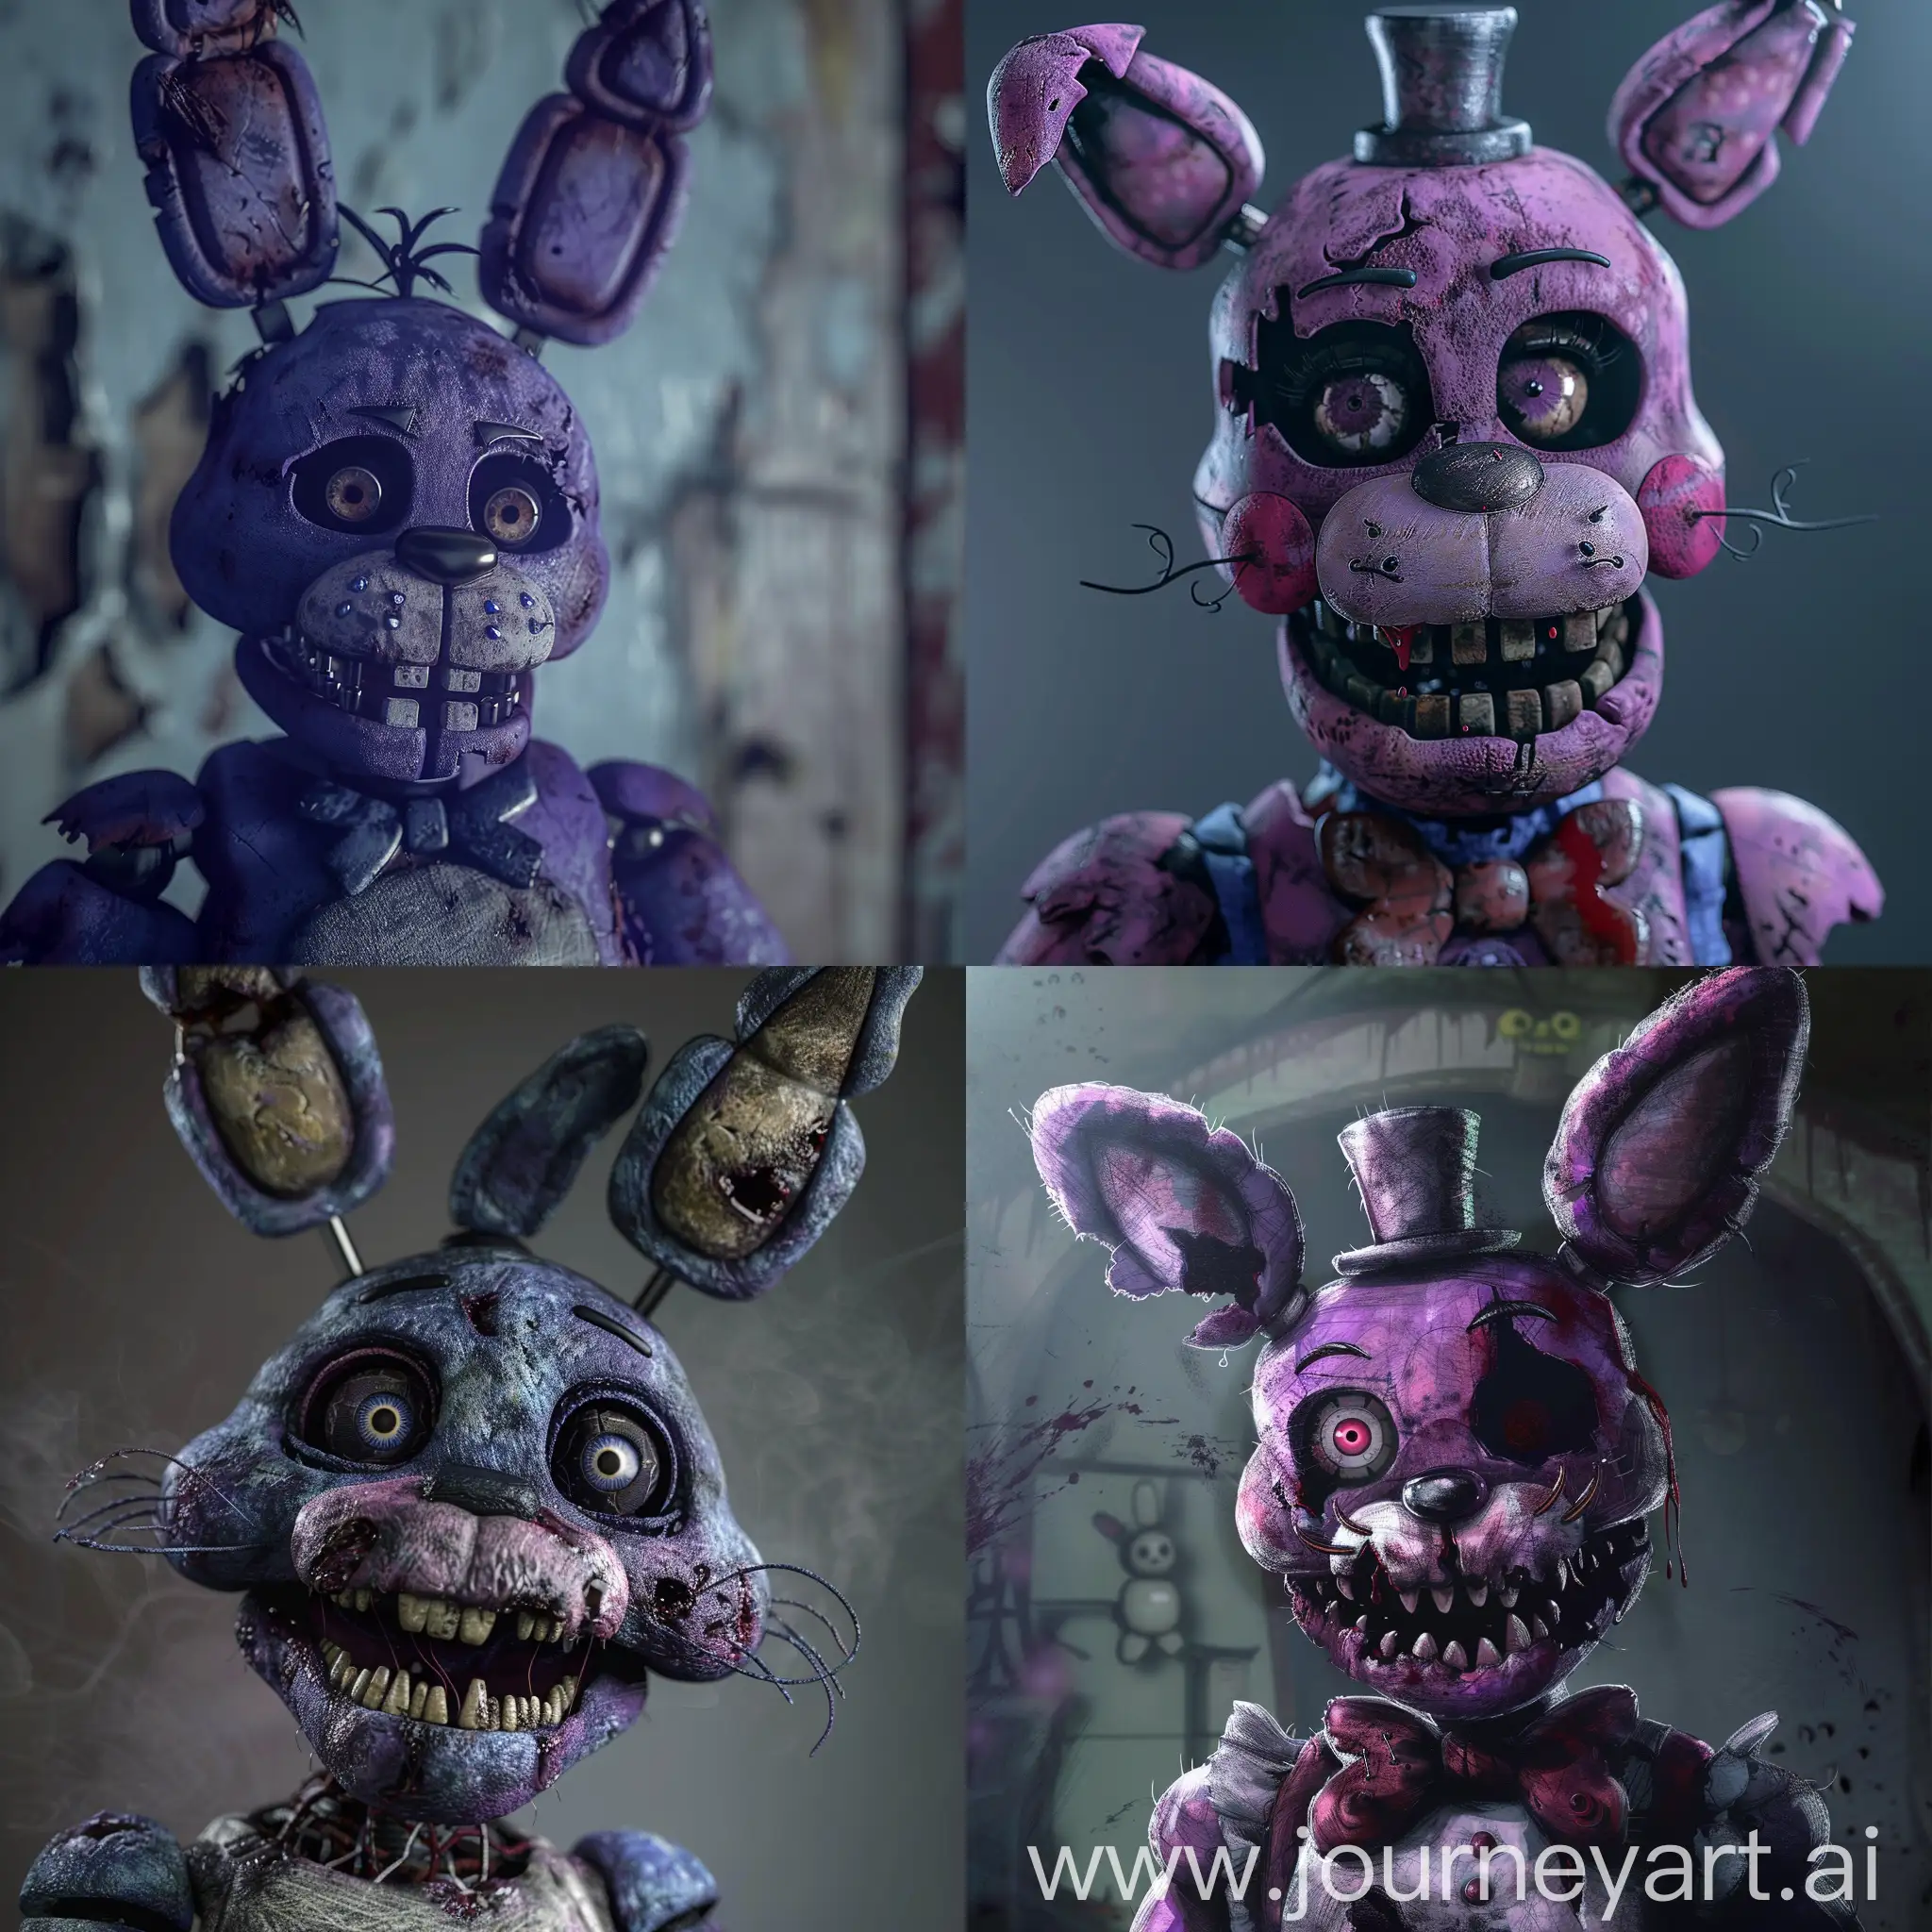 A scarier version of Bonnie from Five Nights at Freddy's 